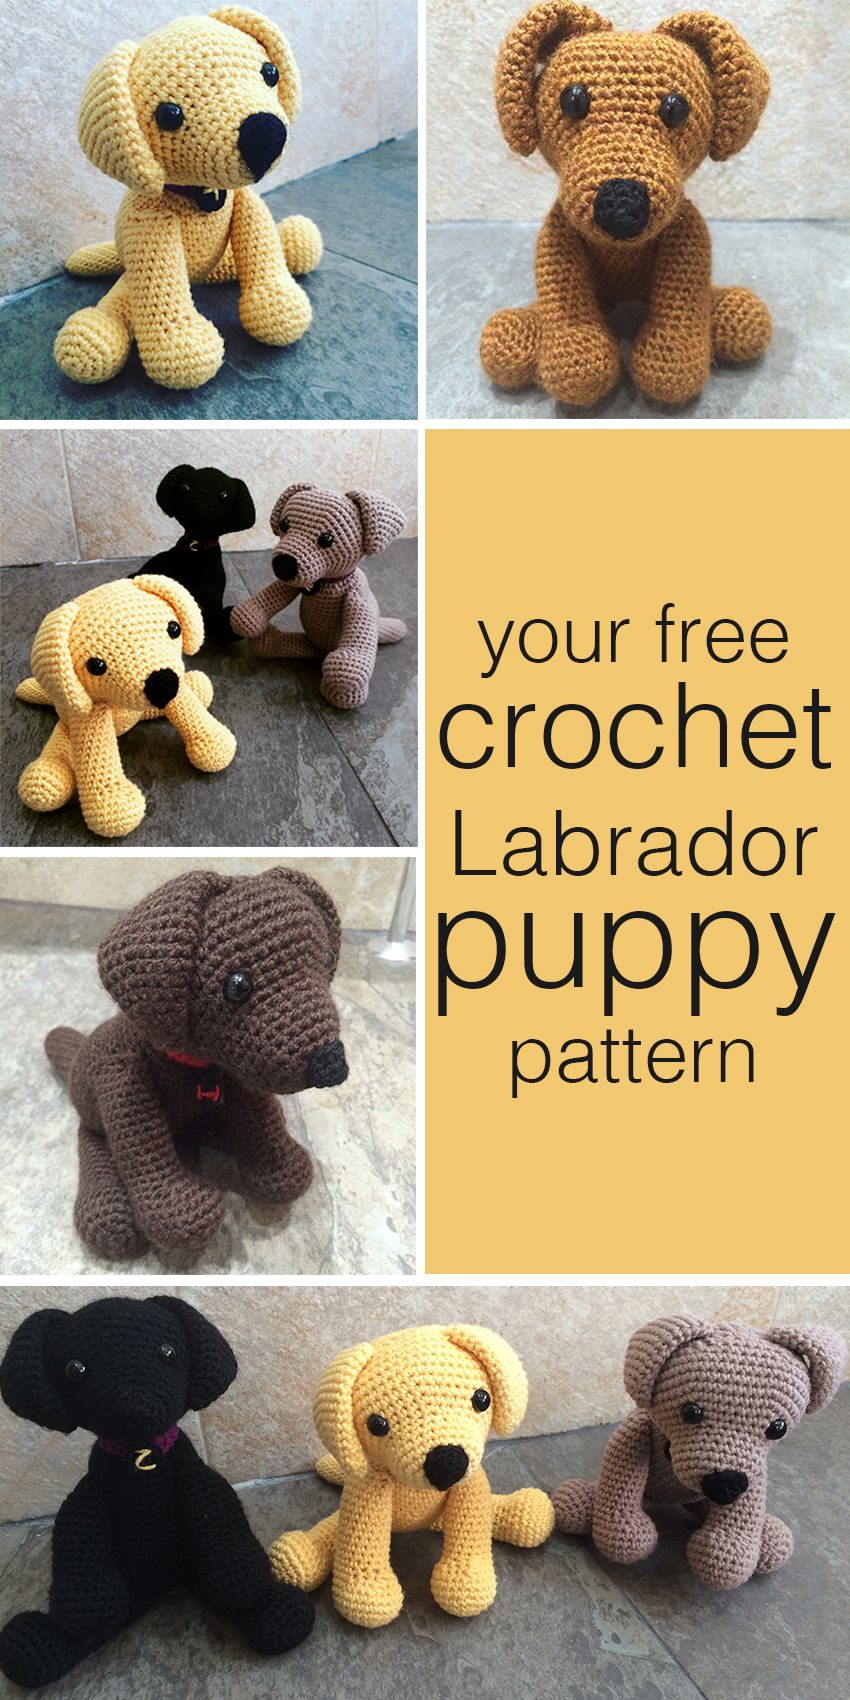 Puppy Dog Crochet Hat Pattern Crochet Labrador How To Make Your Own Toy Dog The Labrador Site